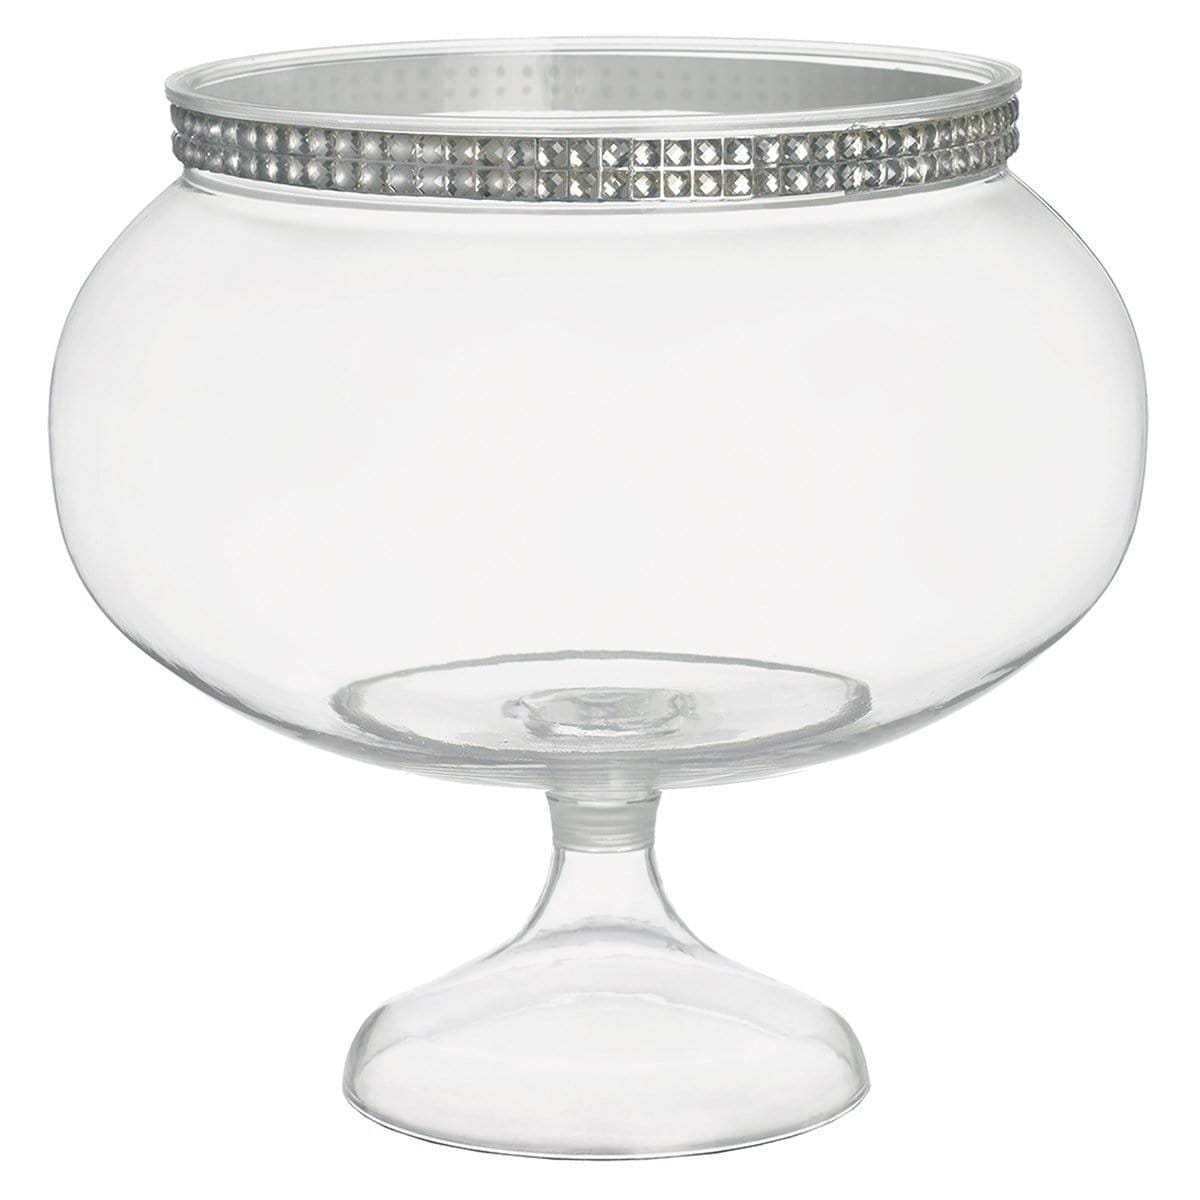 Buy Plasticware Short Pedestal Jar with Silver Gems sold at Party Expert